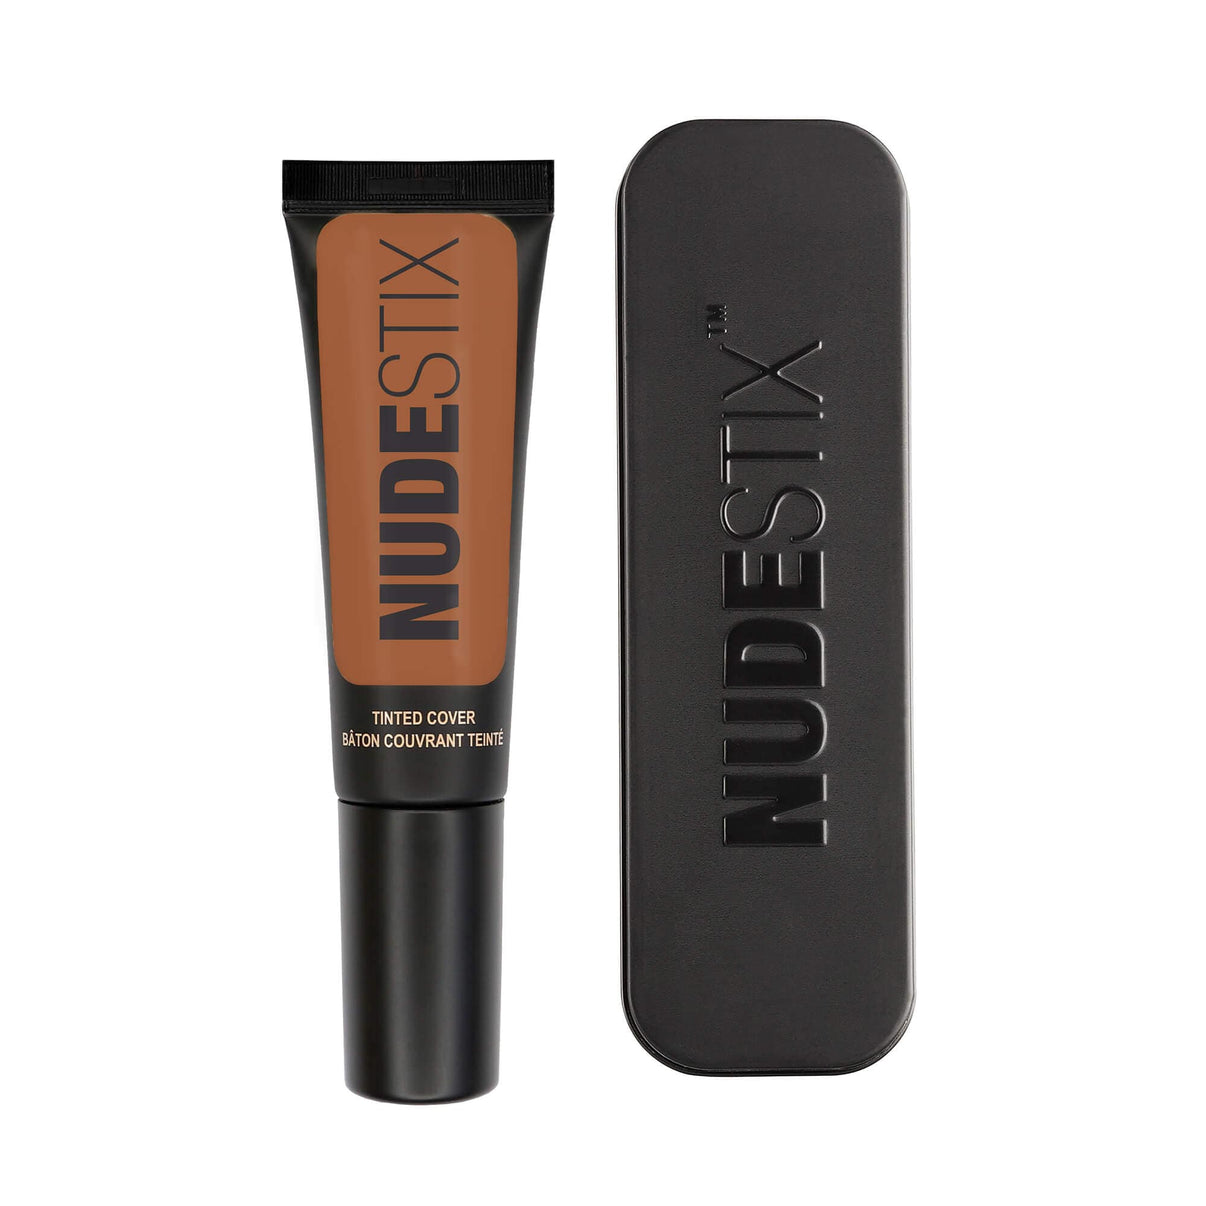 Tinted Cover Liquid Foundation in shade nude 9 and Nudestix can